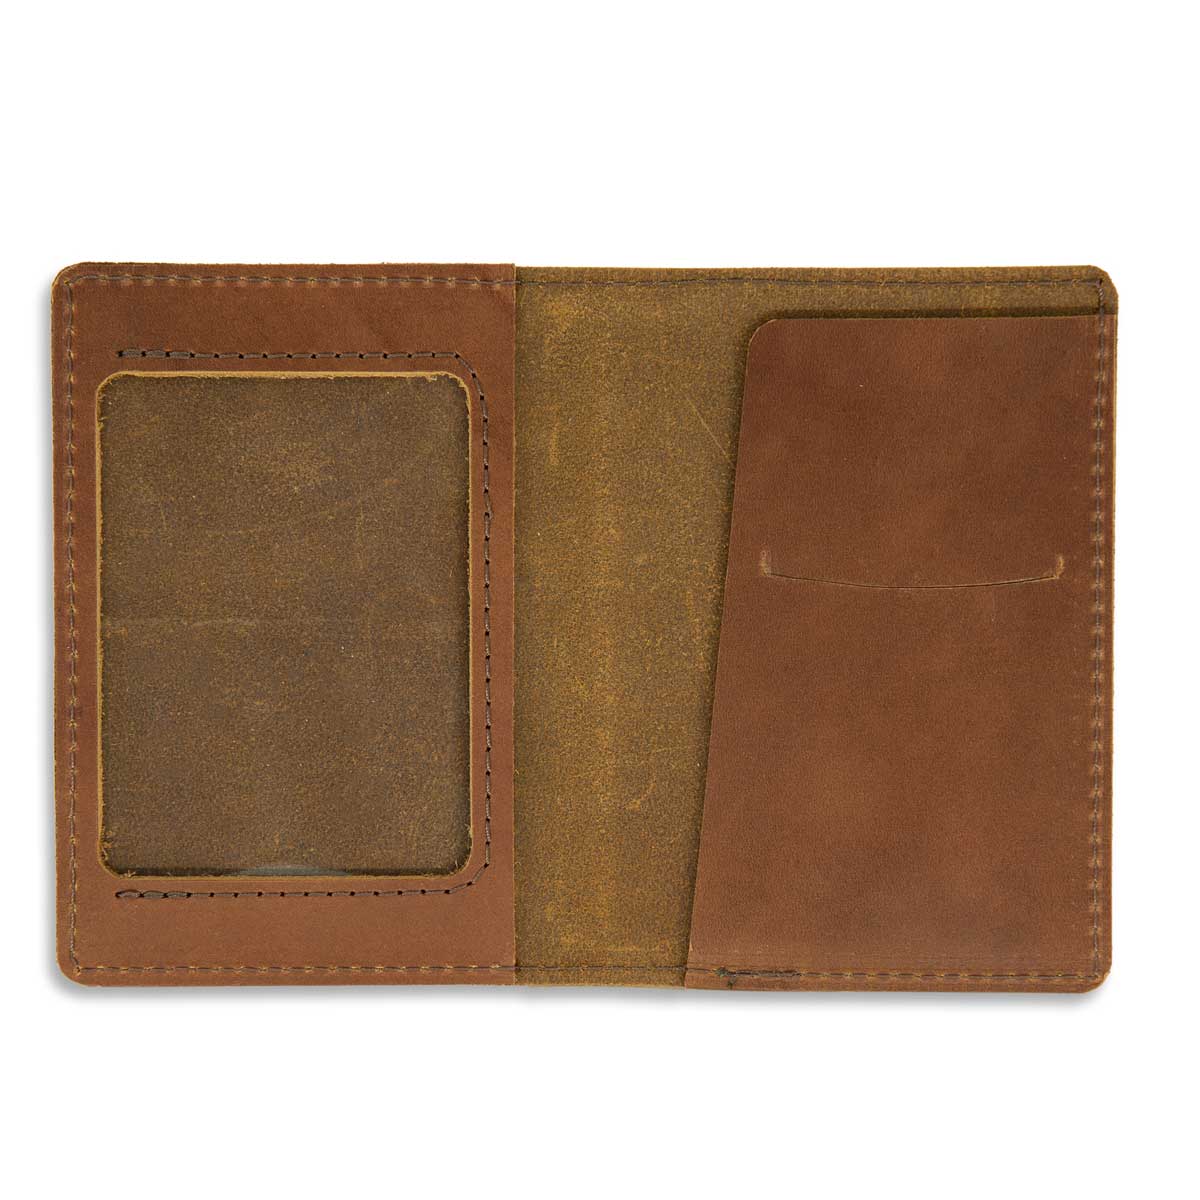 Rustico AC0160-0002 Leather Passport Cover for Unisex Saddle